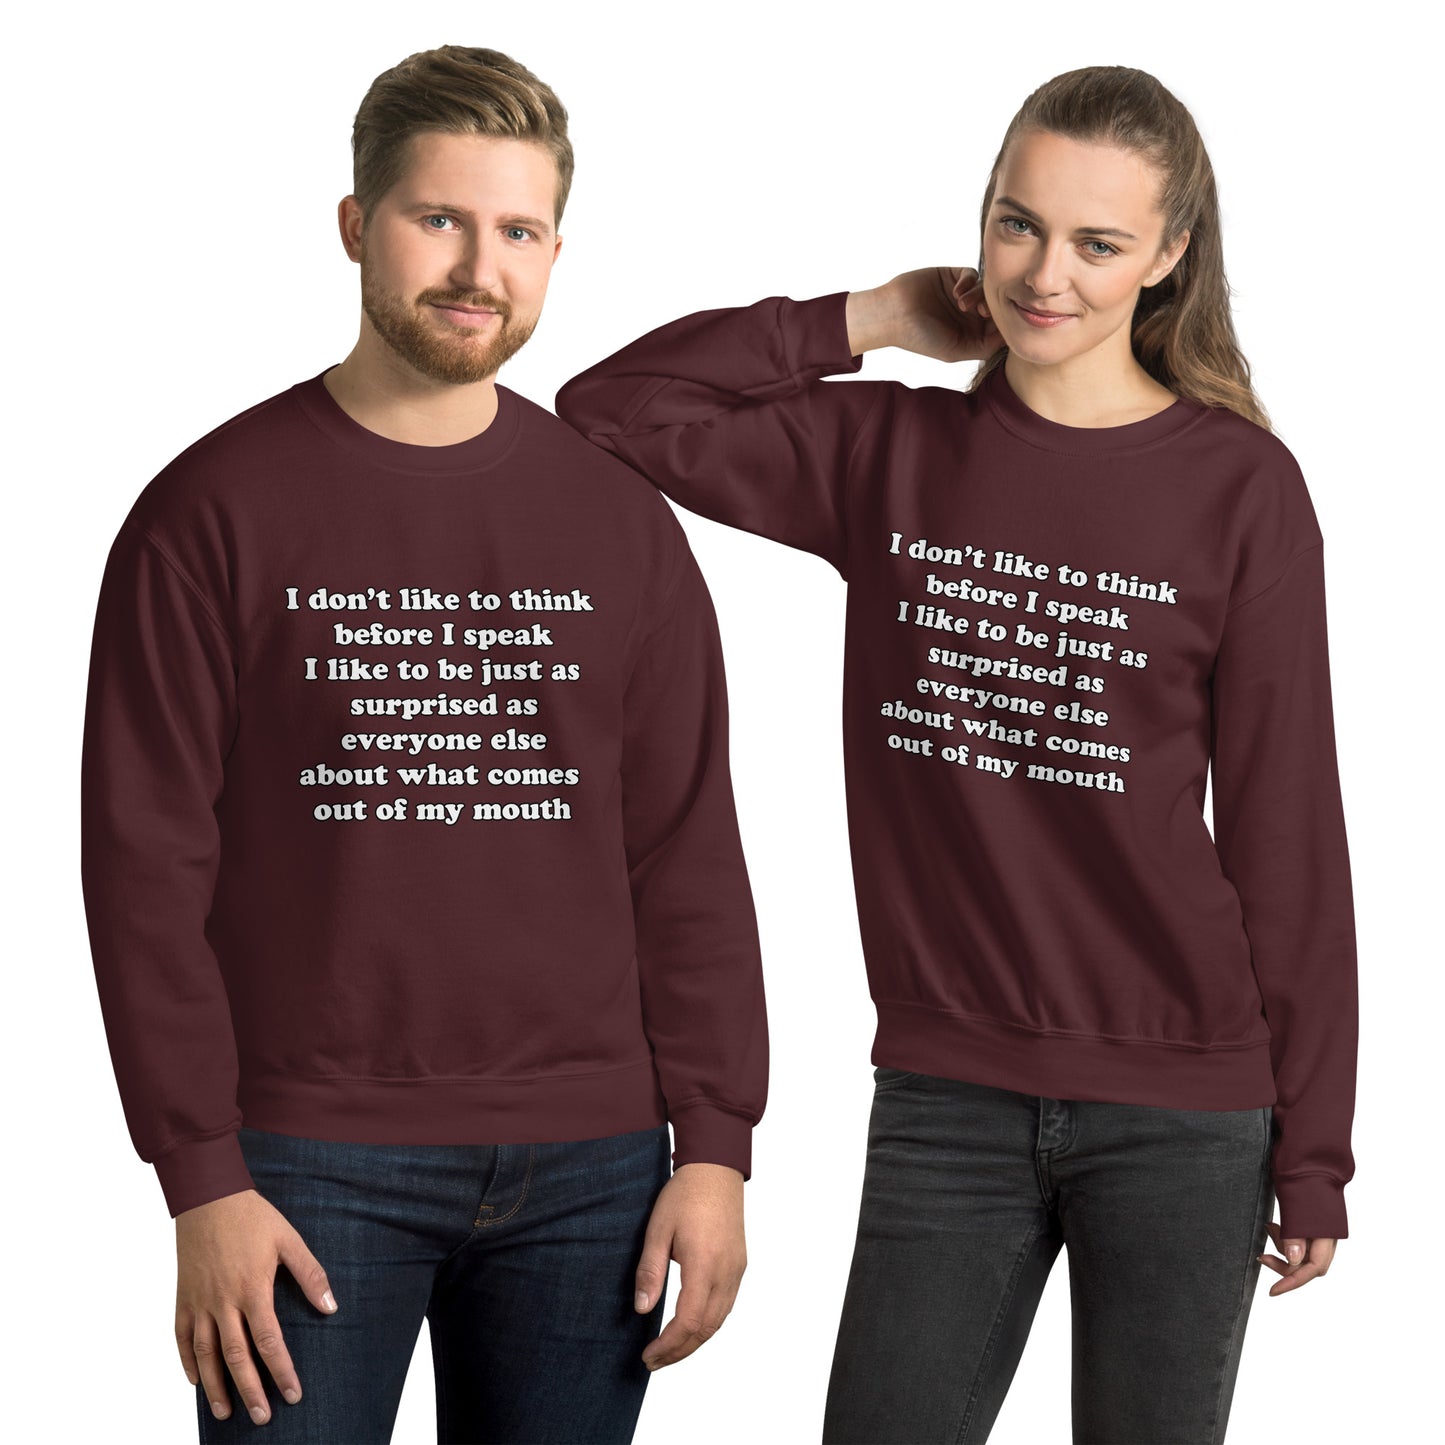 Man and woman with maroon sweatshirt with text “I don't think before I speak Just as serprised as everyone about what comes out of my mouth"